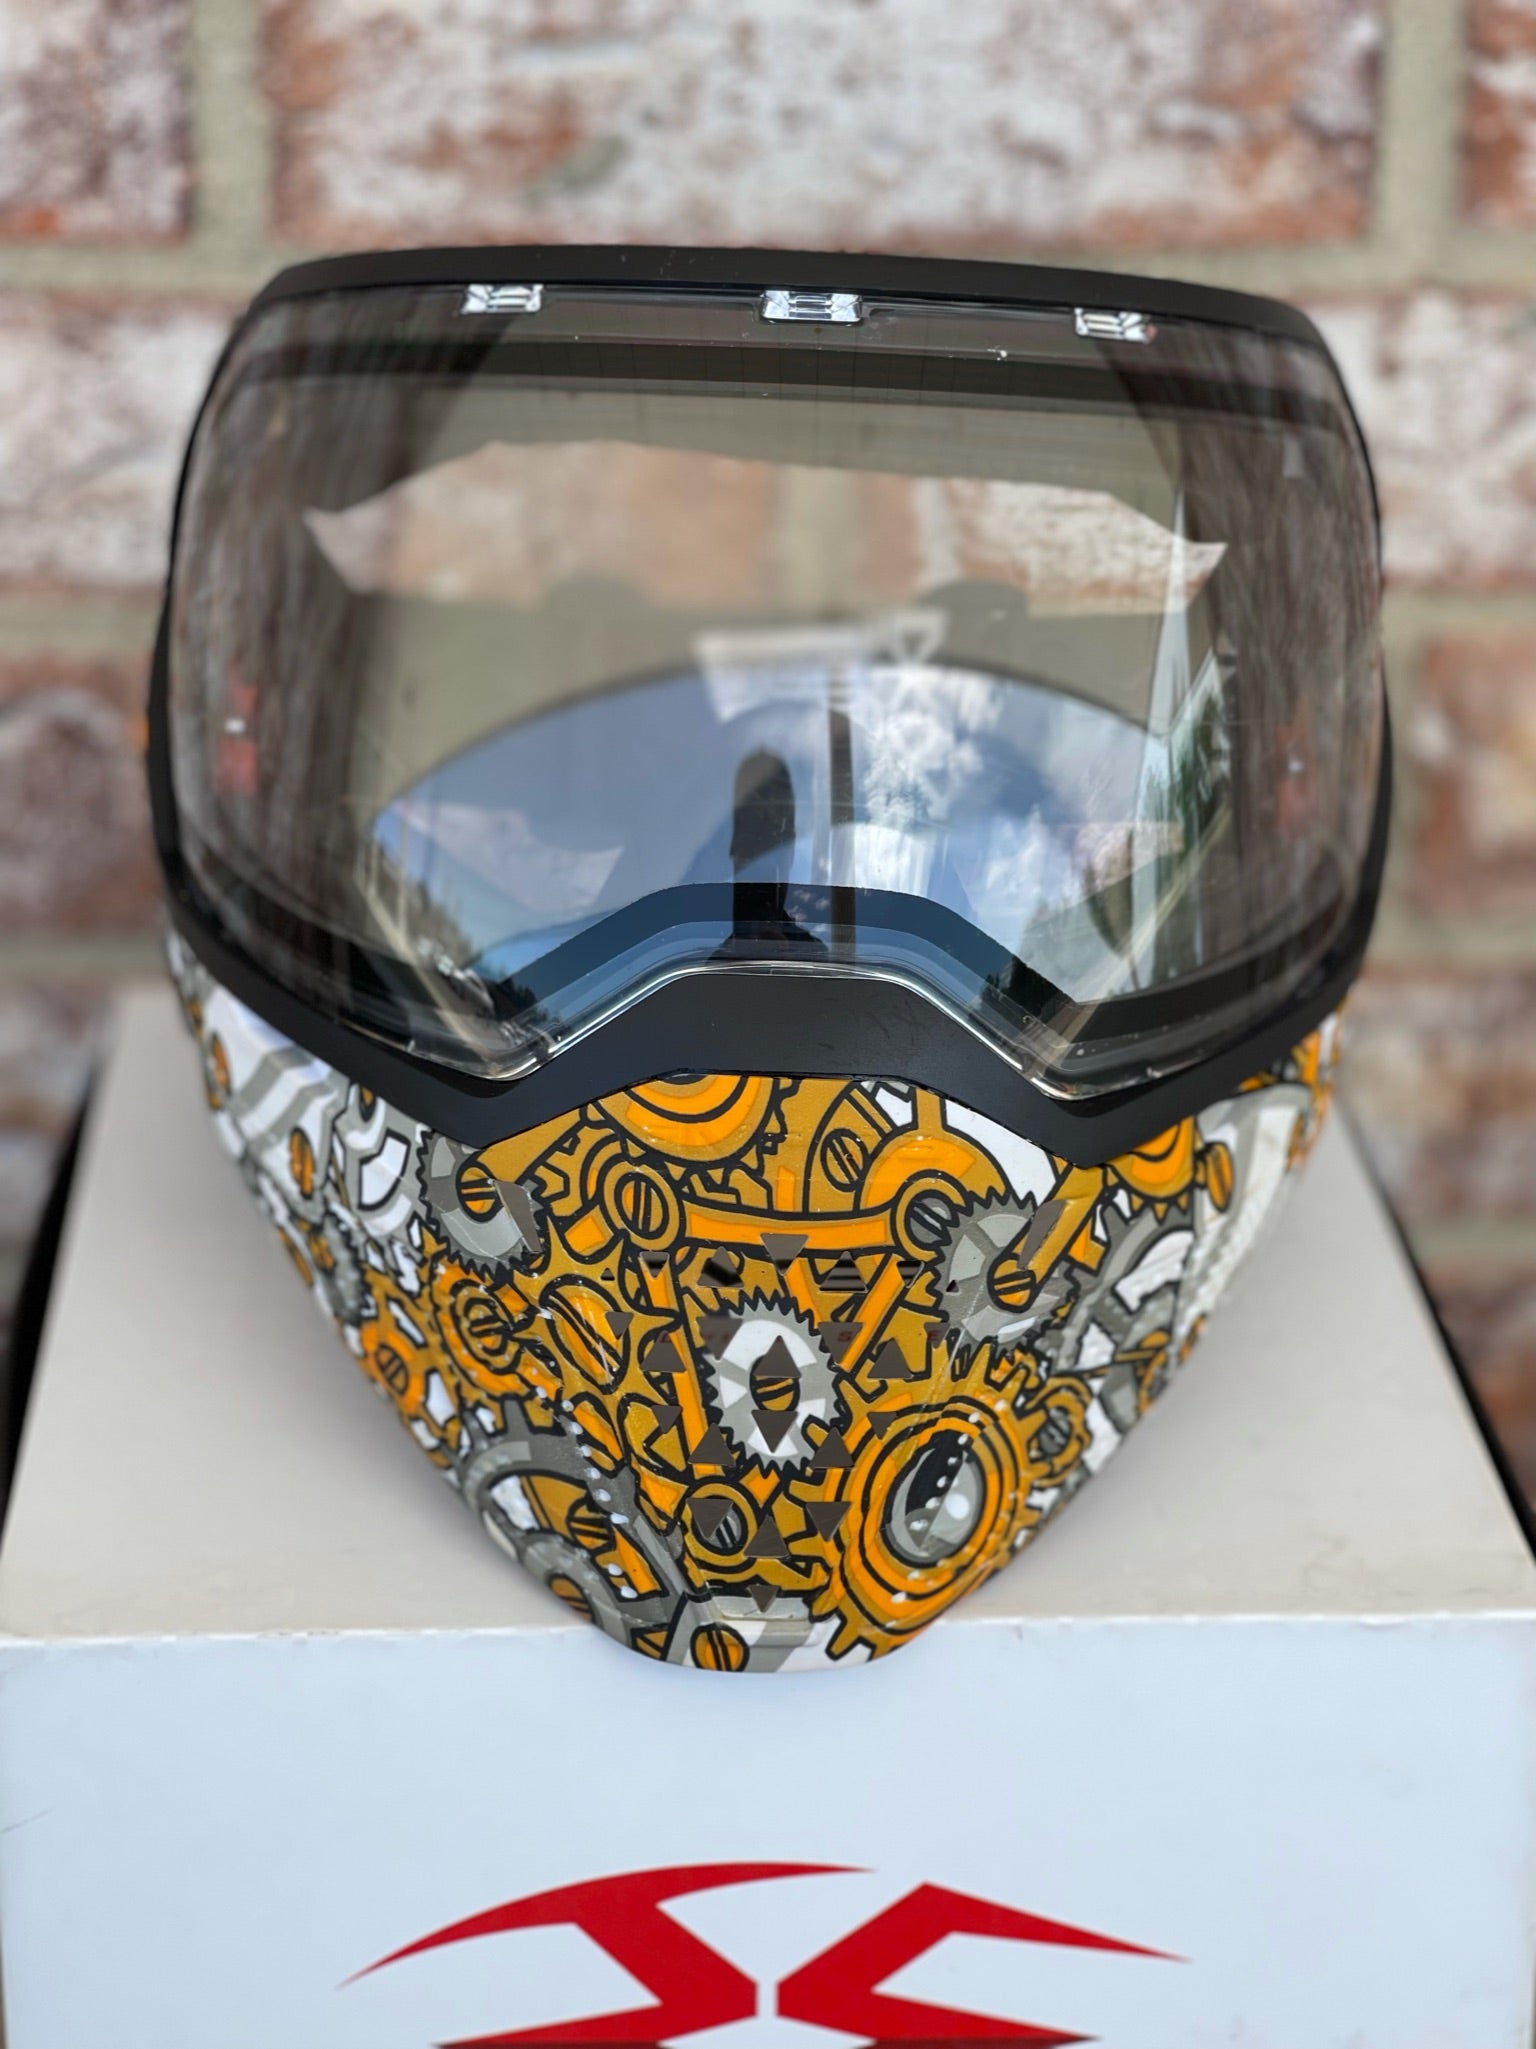 Used Empire EVS Paintball Mask - Gears